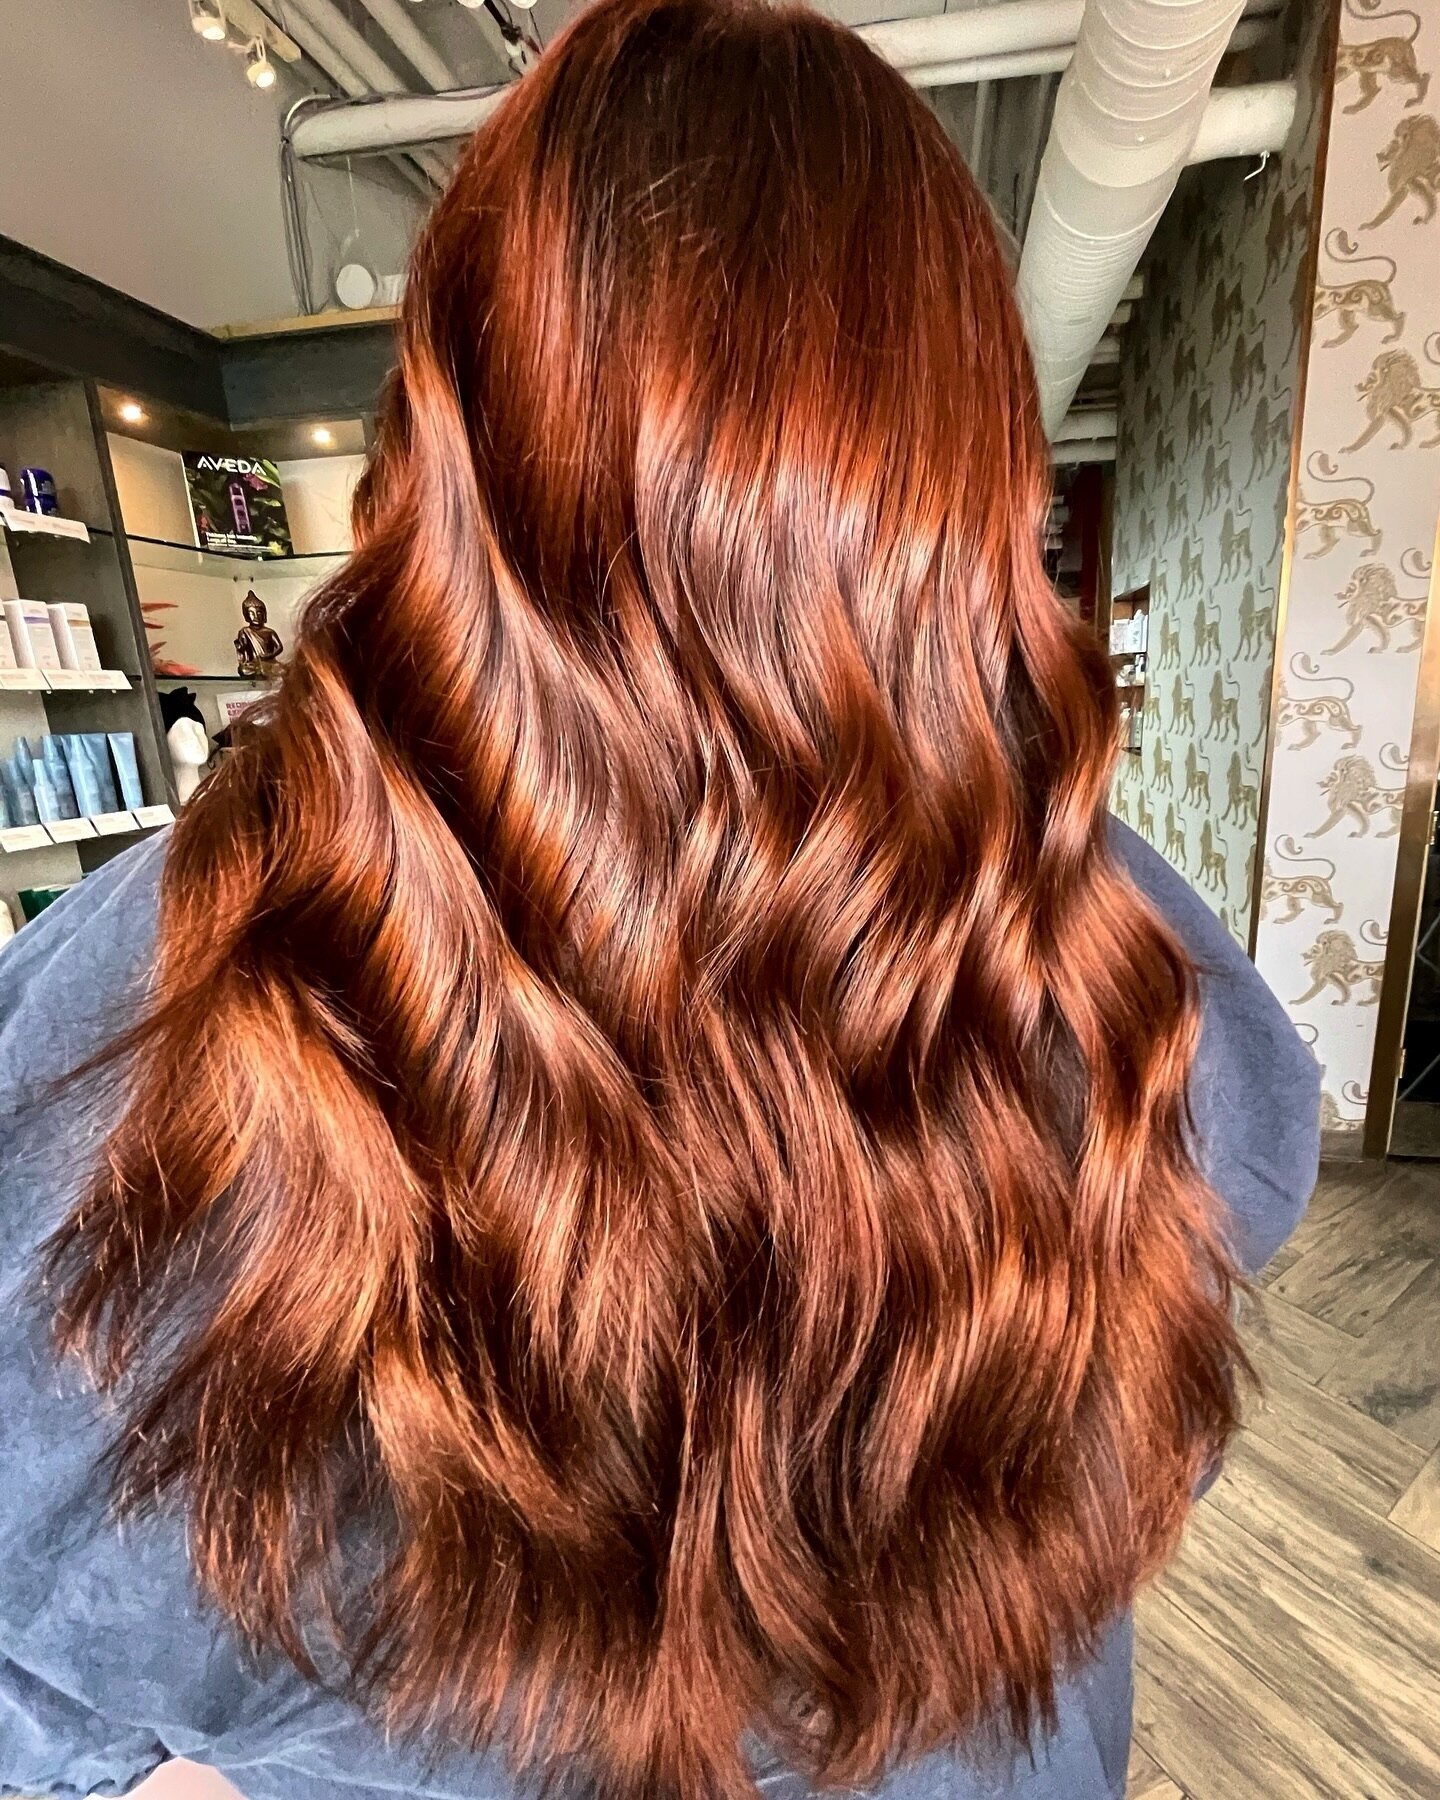 Crazy how a quick toner can make the hair look brand new 😍⁠
⁠
She asked for more red so we gave her more RED ❤️⁠
⁠
Hair by Graduate Stylist Jessy @hairstyledbyjessy at our West 85th location.